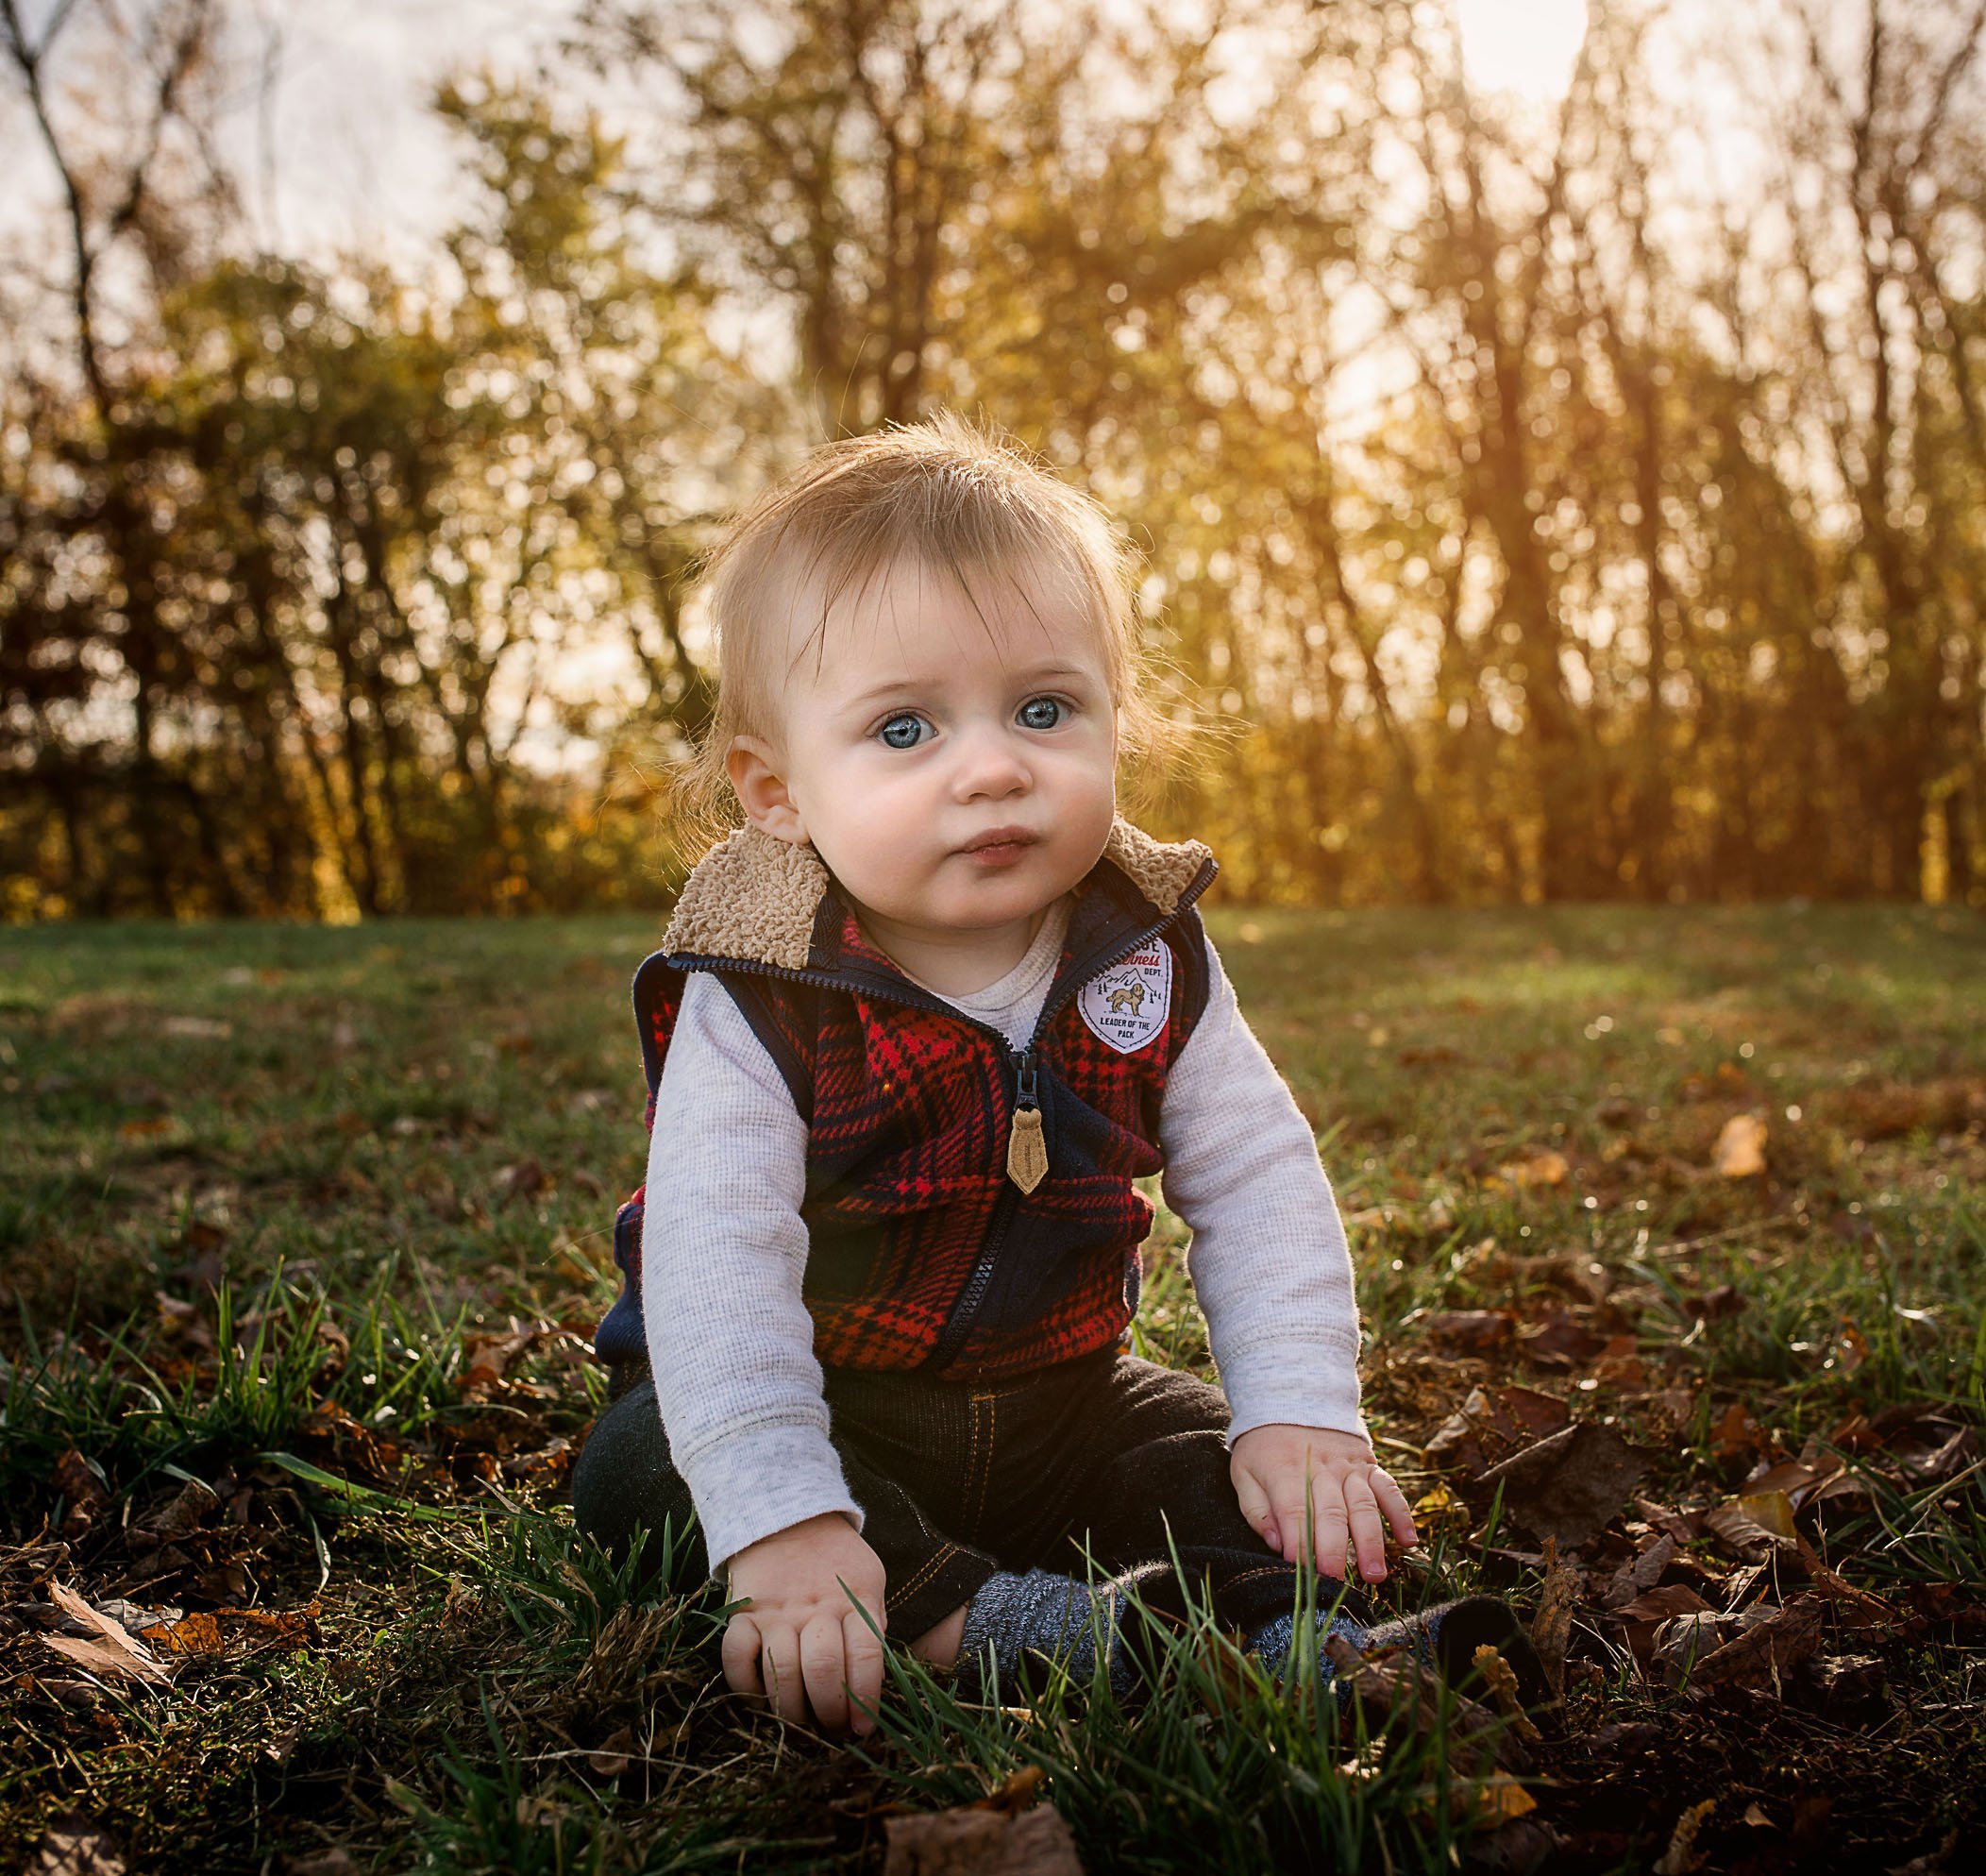 6 month old baby boy sitting outside with golden light coming through the trees in fall